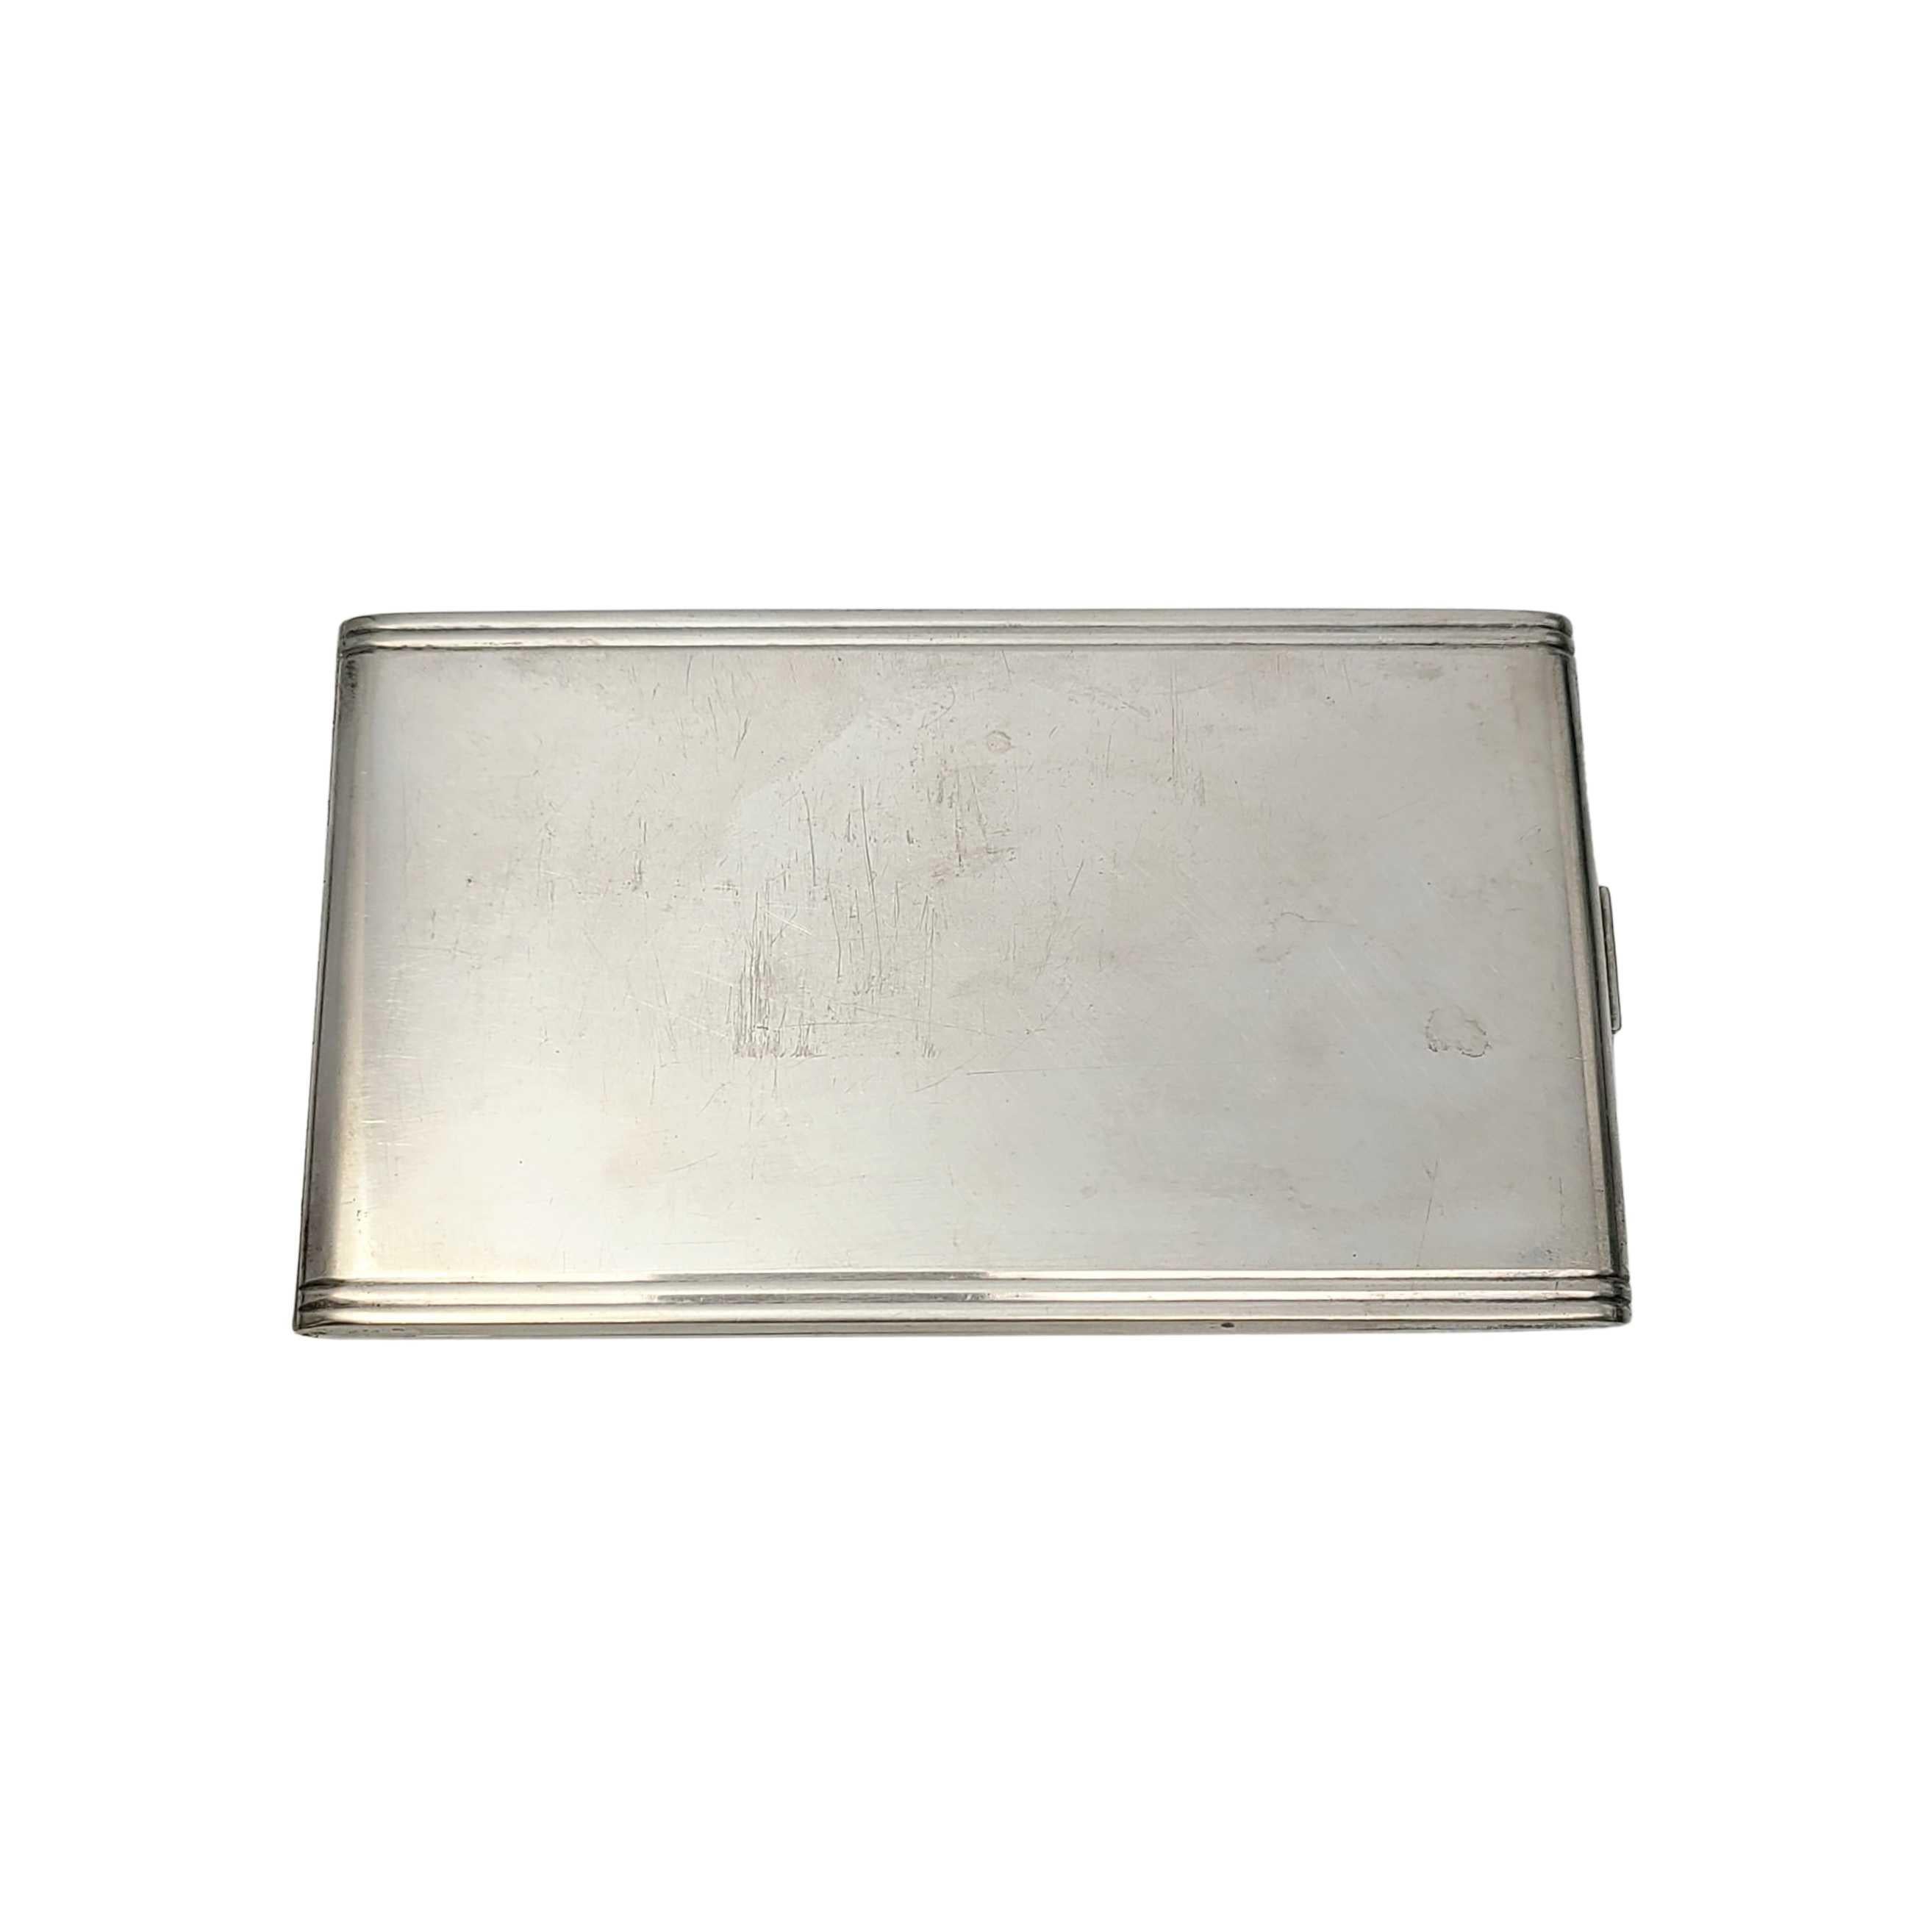 Vintage .826 silver cigarette case by Hans Jensen of Denmark.

This piece features a smooth polished finish with banded edges. Push button mechanism to open. No monogram.

Measures approximate 3 1/8